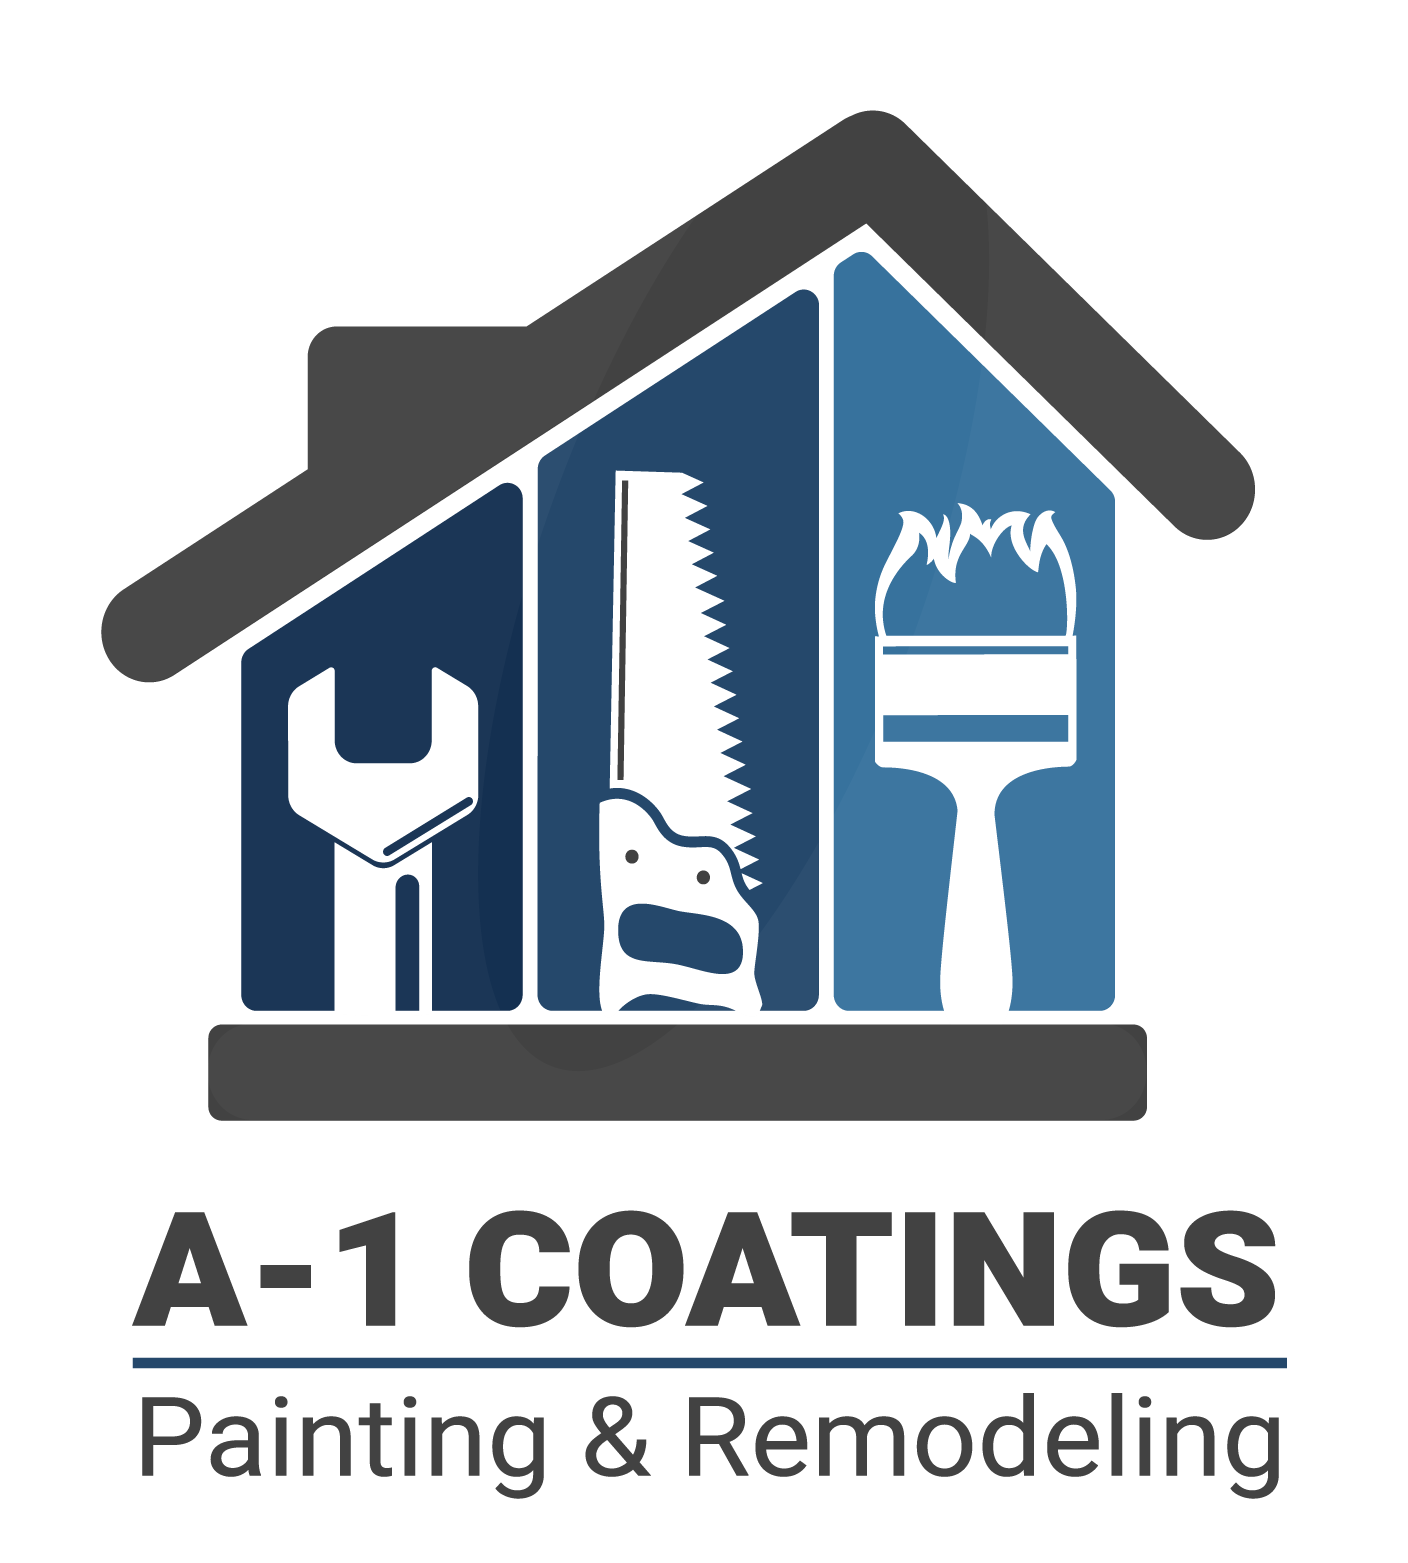 A-1 Coatings Painting & Remodeling Logo